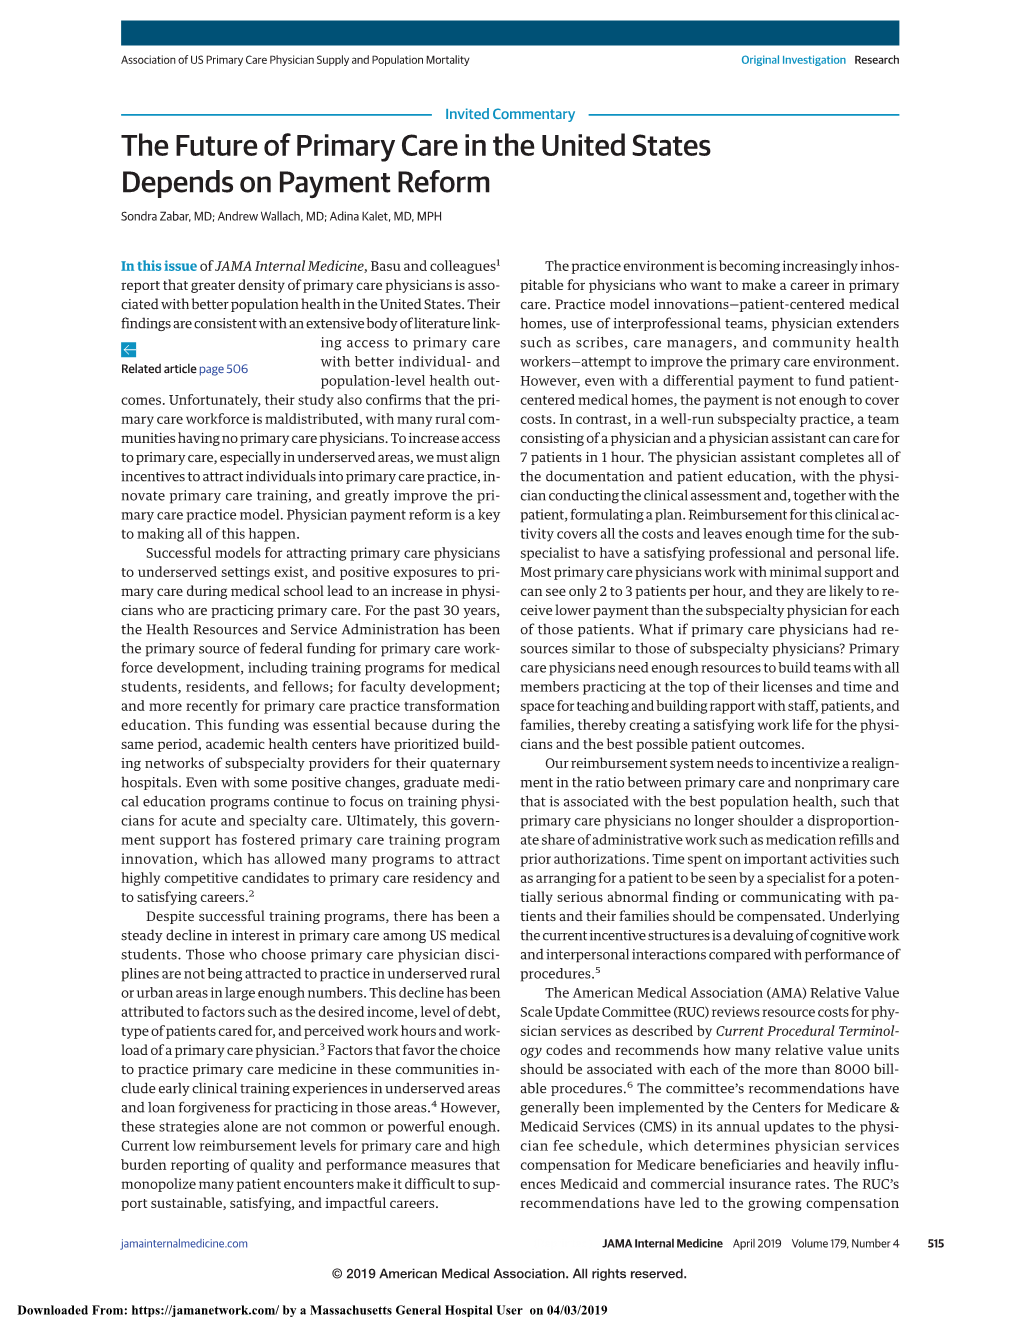 The Future of Primary Care in the US Depends on Payment Reform